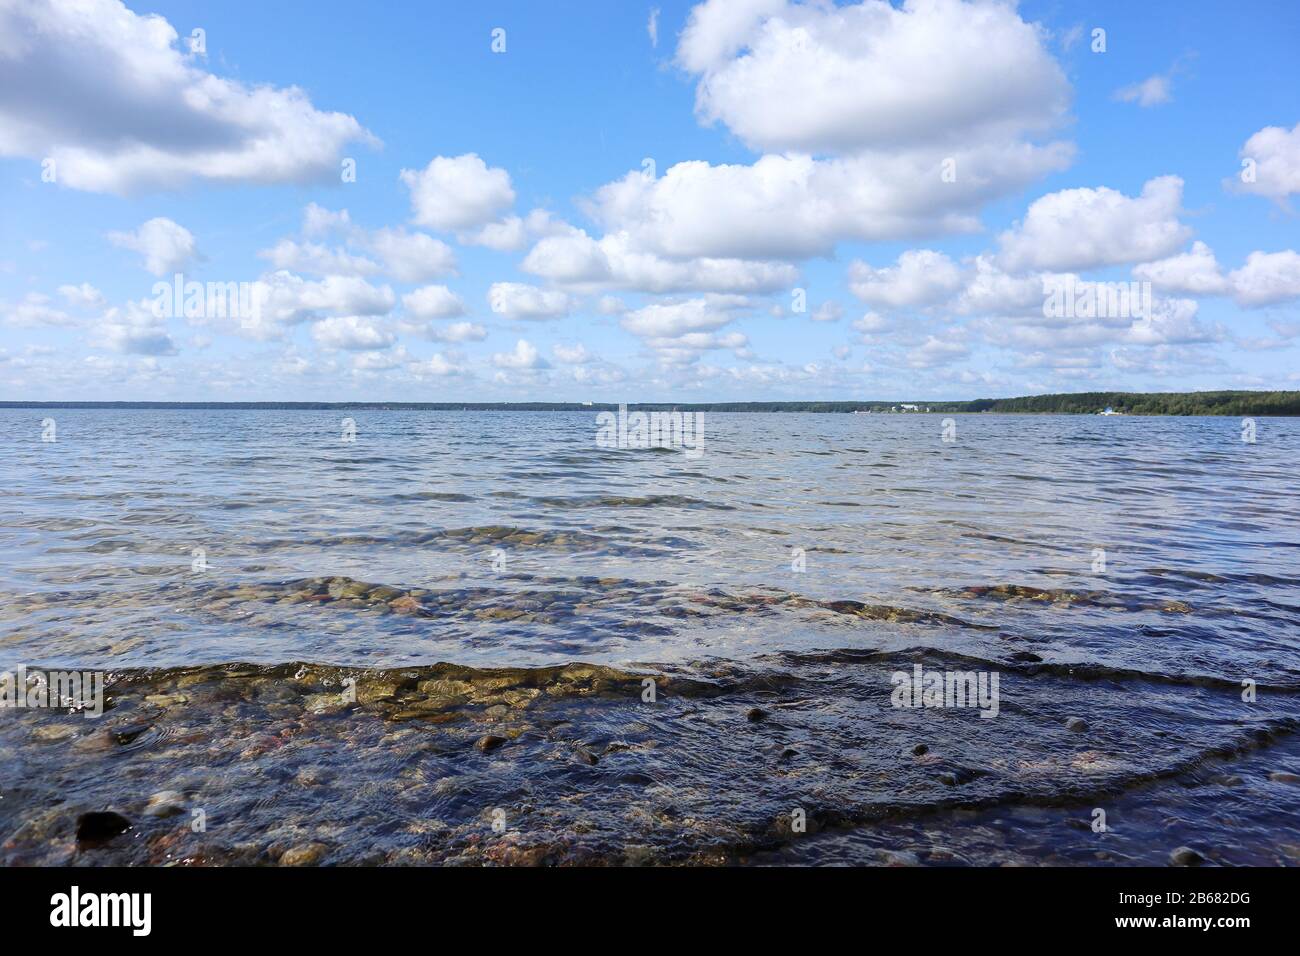 Beautiful Belarus skyscape on big lake in national park with sparkling water and marvelous clouds in blue sky landscape background Stock Photo